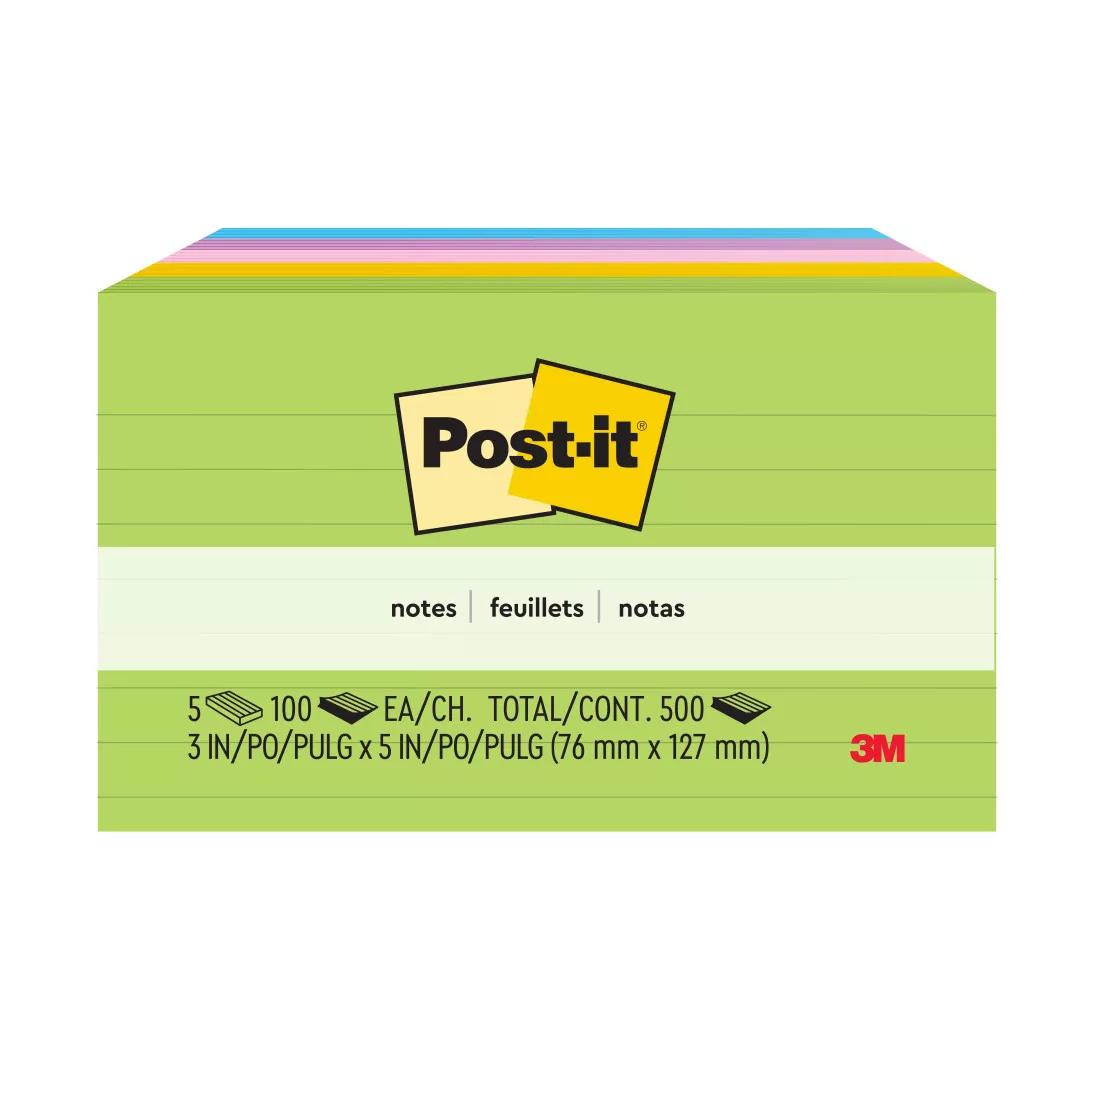 Post-it® Notes, 635-5AU, 3 in x 5 in (76 mm x 127 mm), Jaipur Colors,
Lined, 5 Pads/Pack, 100 Sheets/Pad